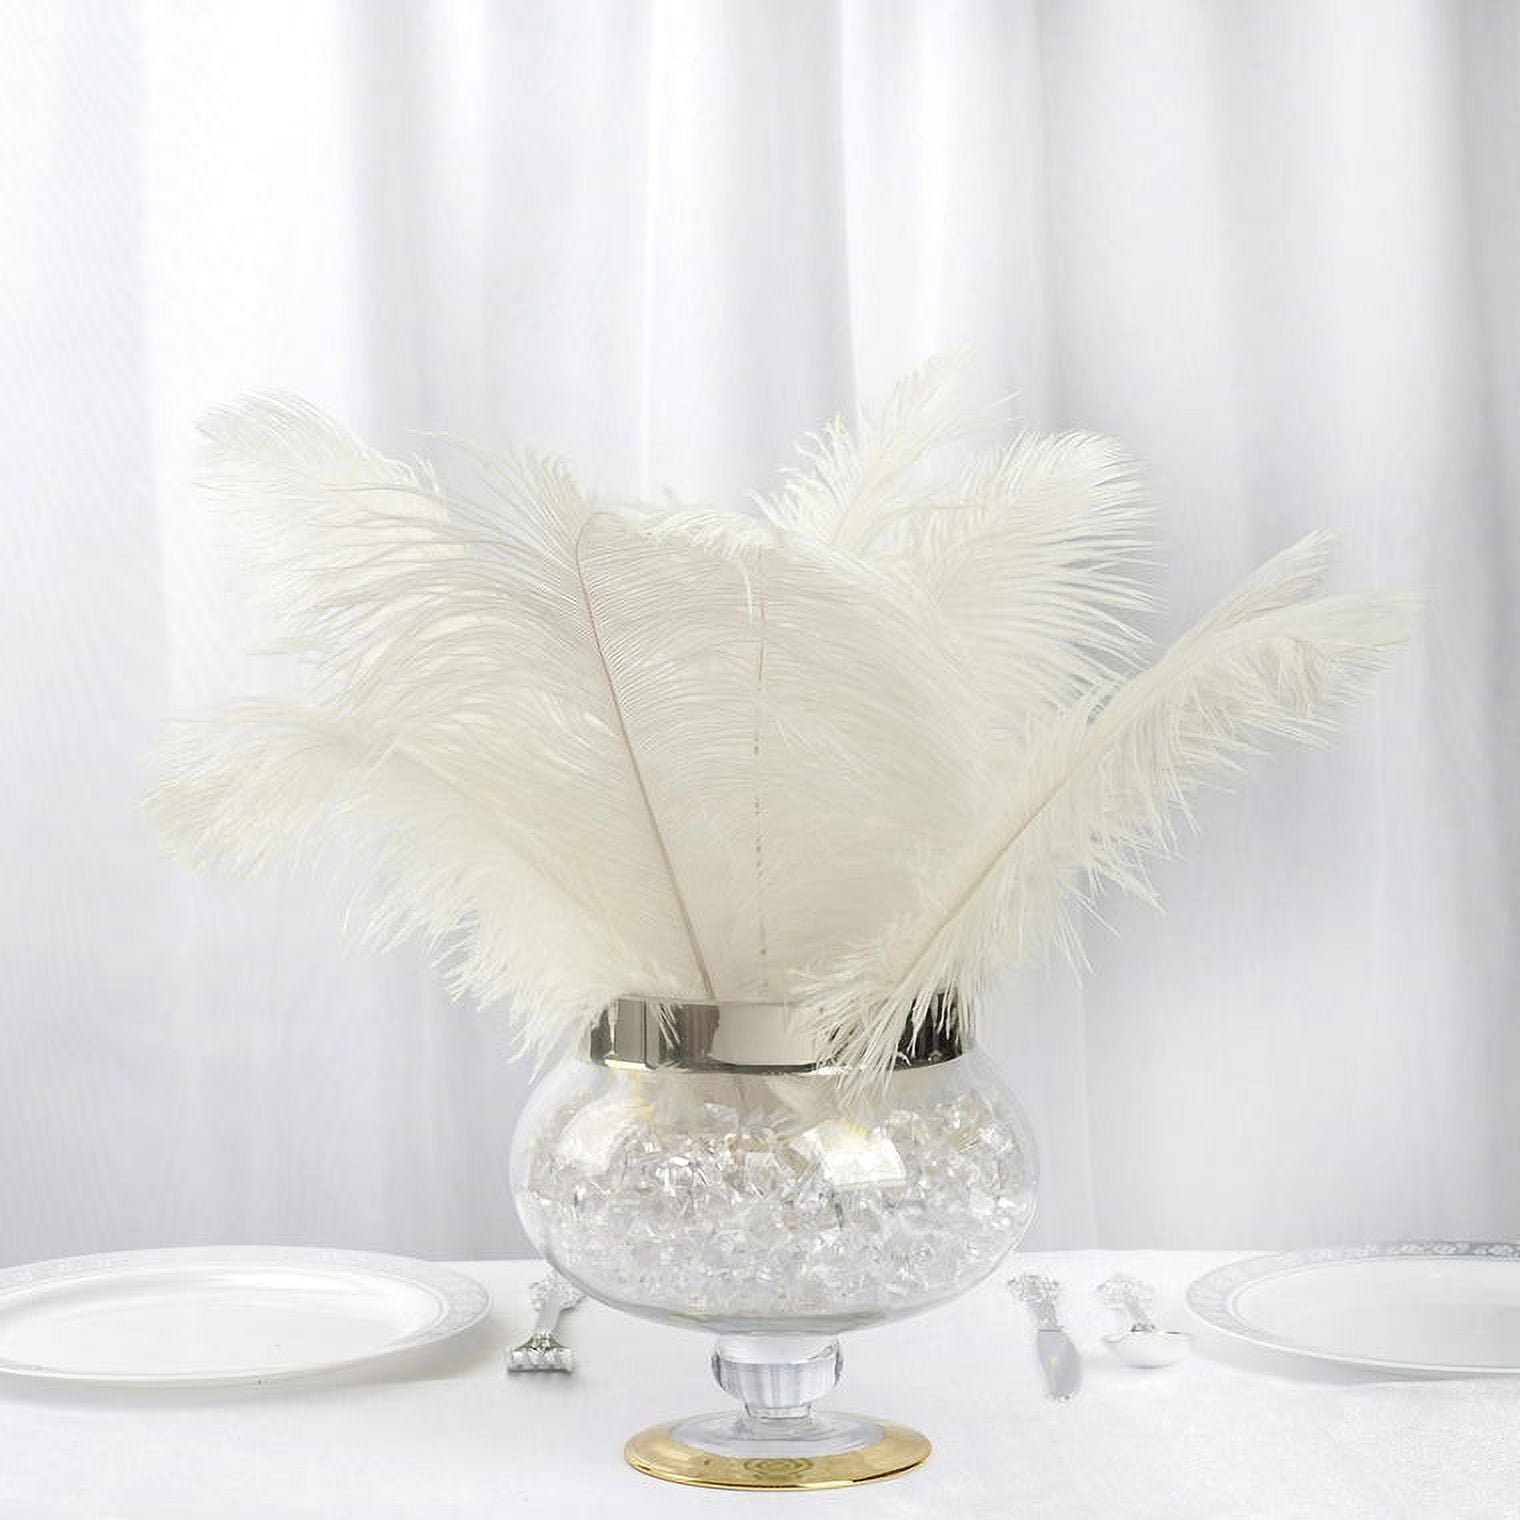 AWAYTR Natural 10-12inch(25-30cm) Ostrich Feathers Plume for Wedding Centerpieces Home Decoration White 10pcs